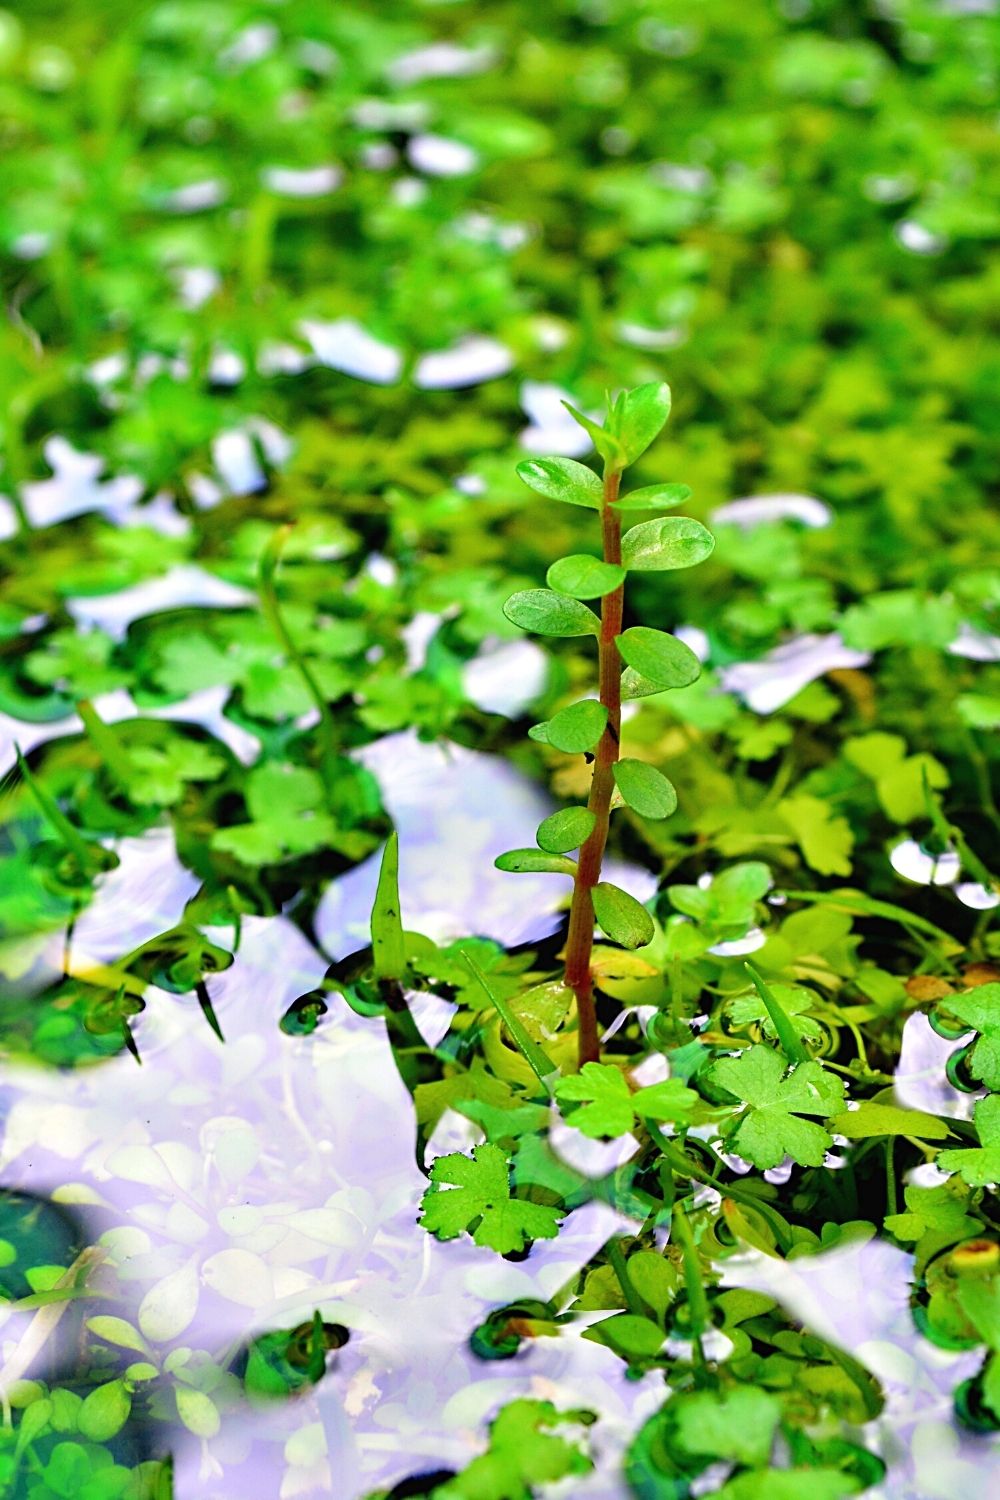 Another great aquatic plant to grow for your betta fish is Rotala Rotundifolia as it's fast-growing and grows tall